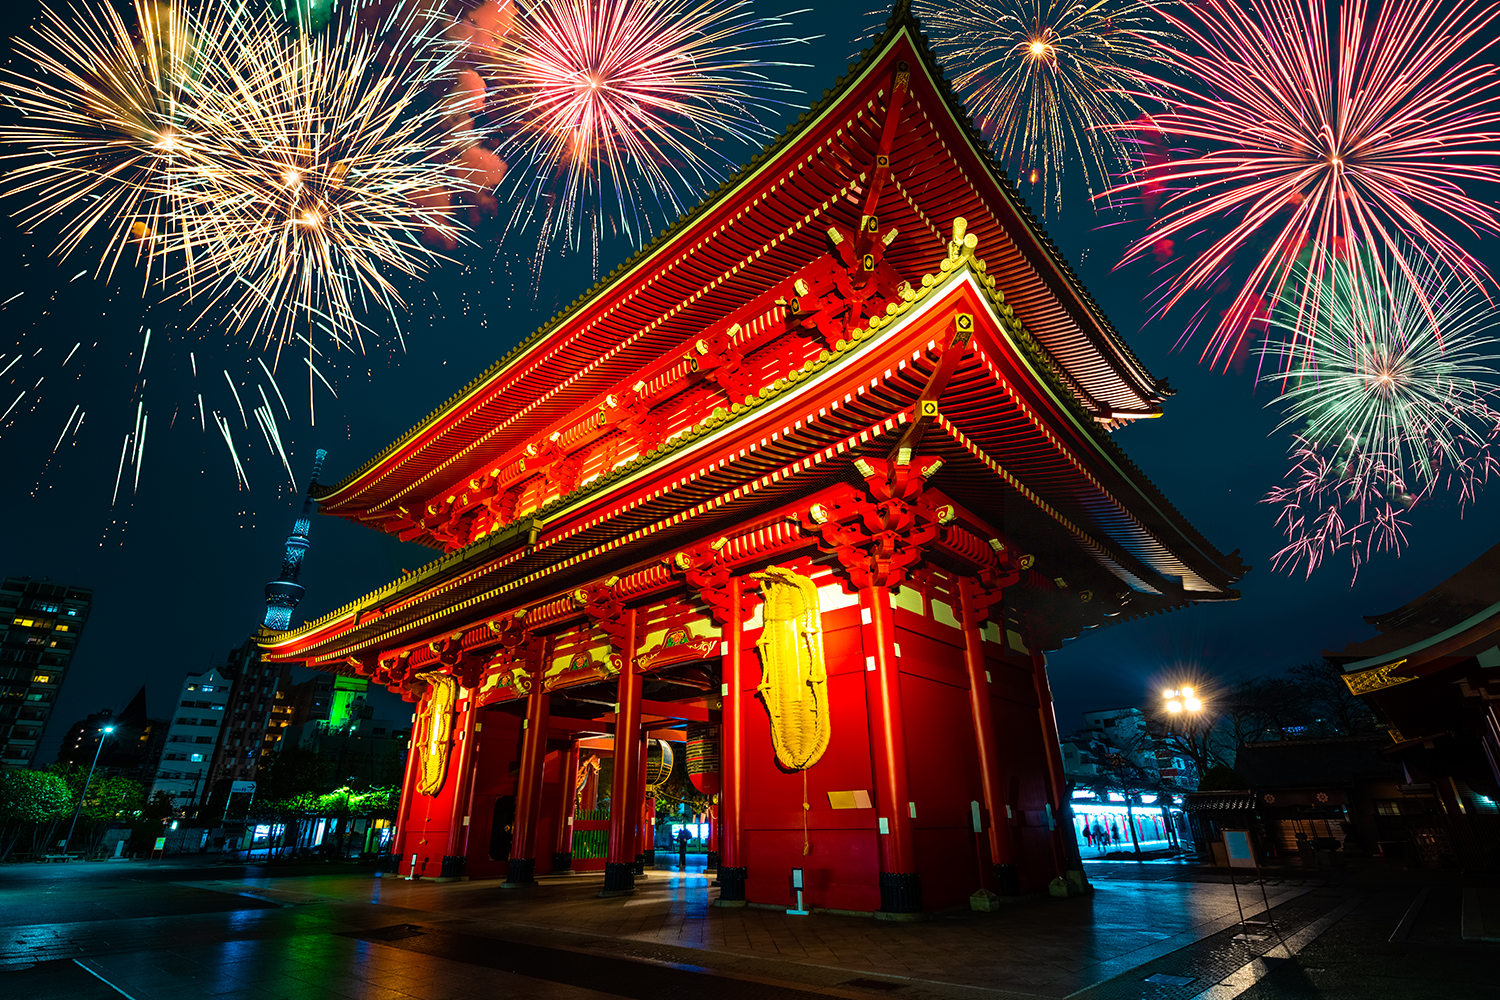 A view of Sensoji Temple's front gate in Asakusa, with fireworks overhead.